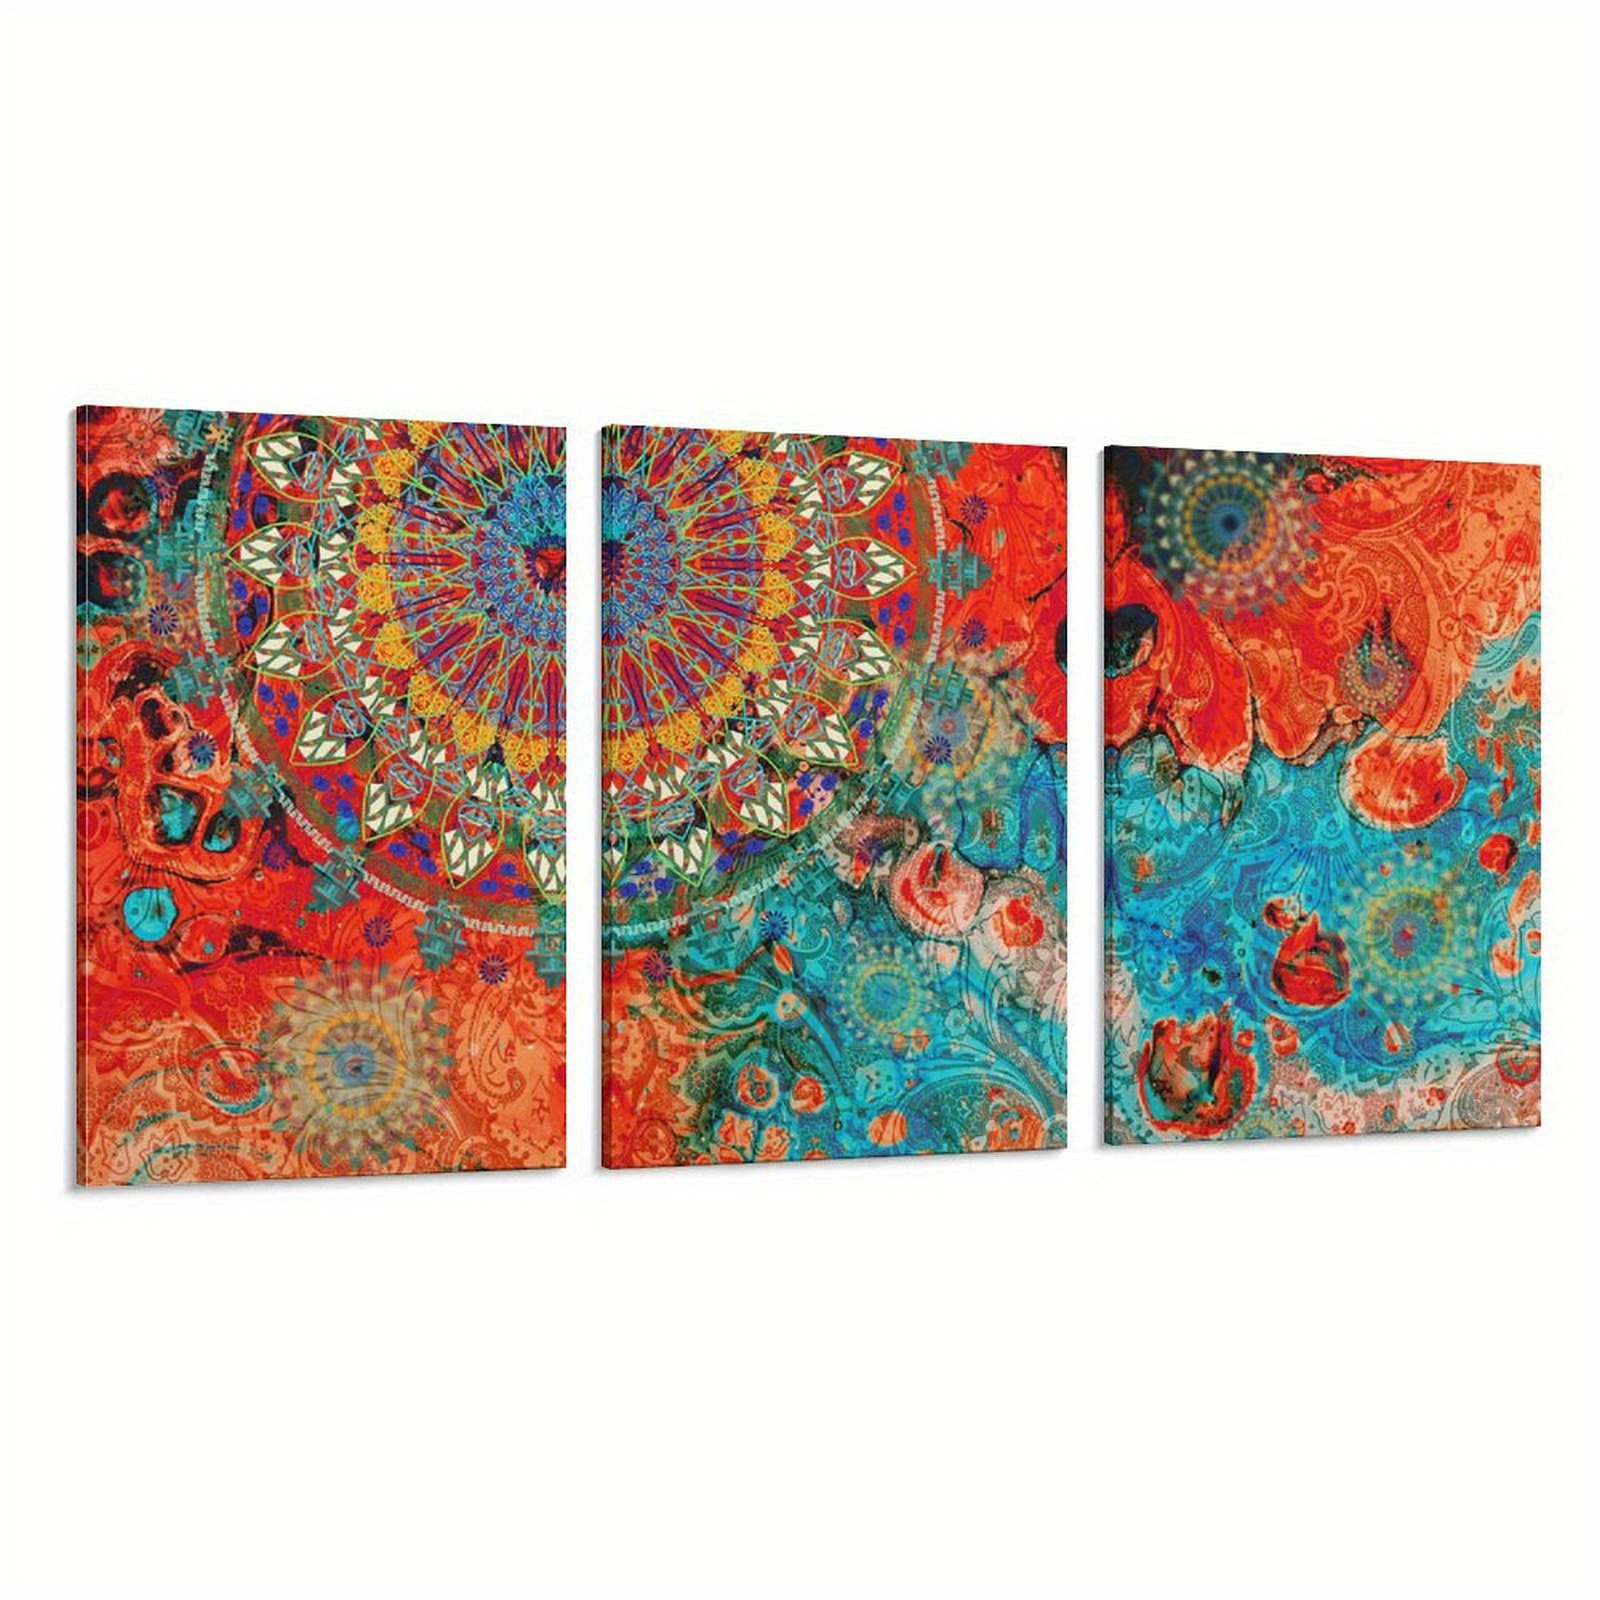 

With Frame Set Of 3 Canvas Poster Ready To Hang Close-up Of Indian Mandala Wall Art Abstract Painting Poster Canvas For Living Room, Farmhouse Wall Hanging Decoration